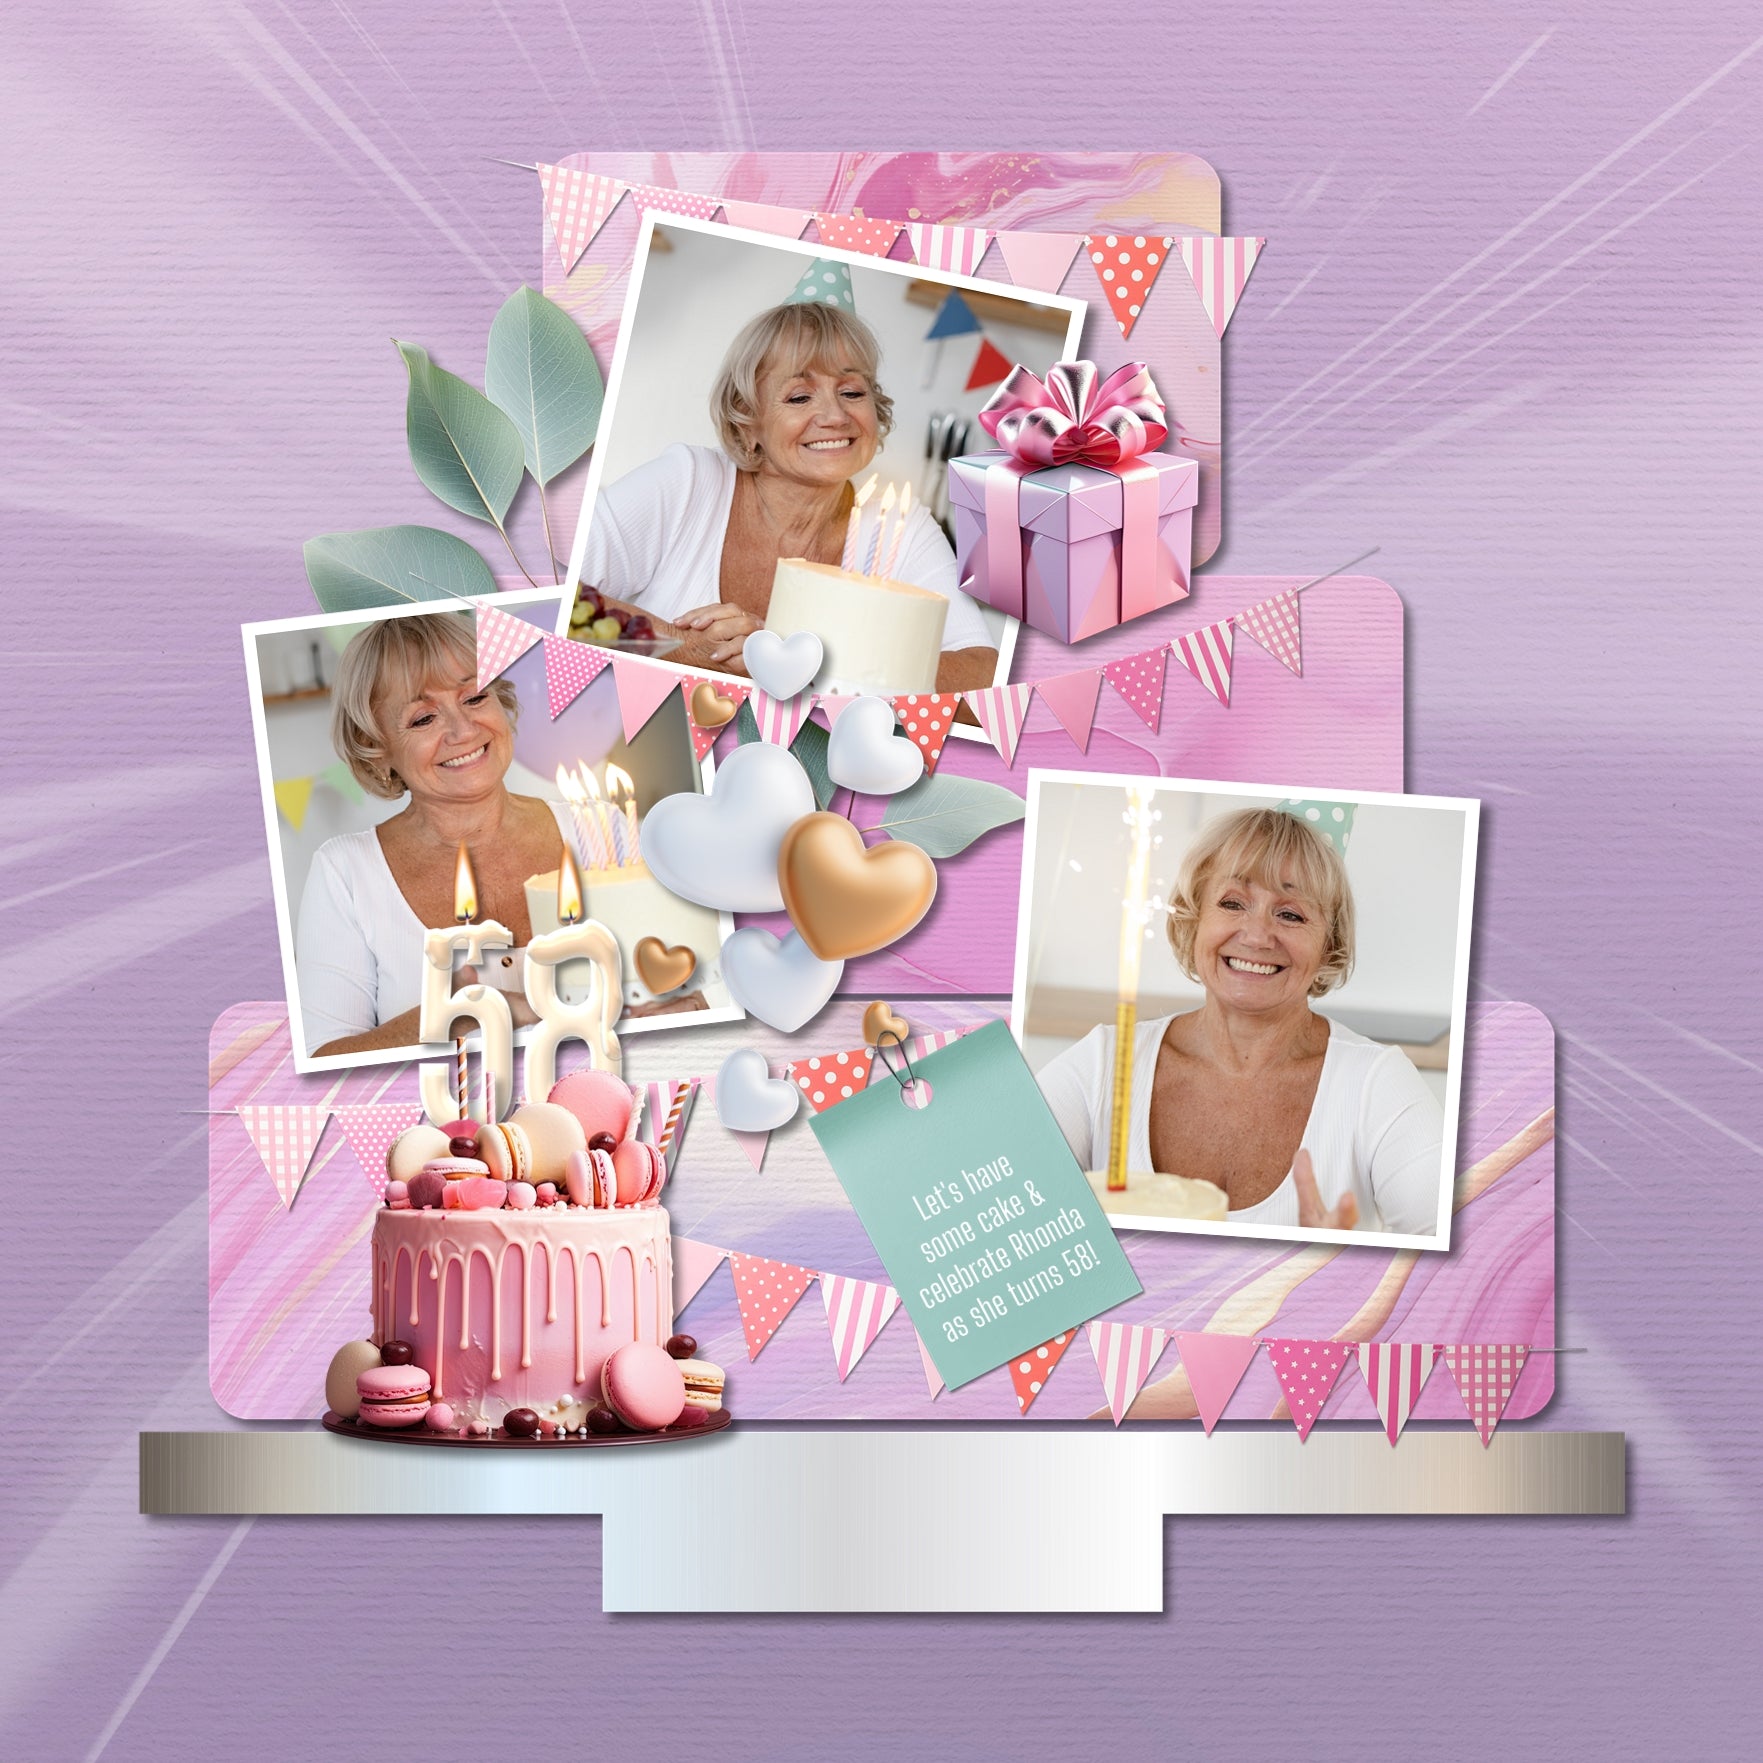 Enjoy the memories created with your girlfriends as you celebrate your birthdays together. This fun and feminine digital scrapbooking embellishments, papers, alpha sets, and rainbow overlays bundle by Lucky Girl Creative Digital Art will help you tell your story and bring a smile to your face as you recall your favorite times together. 